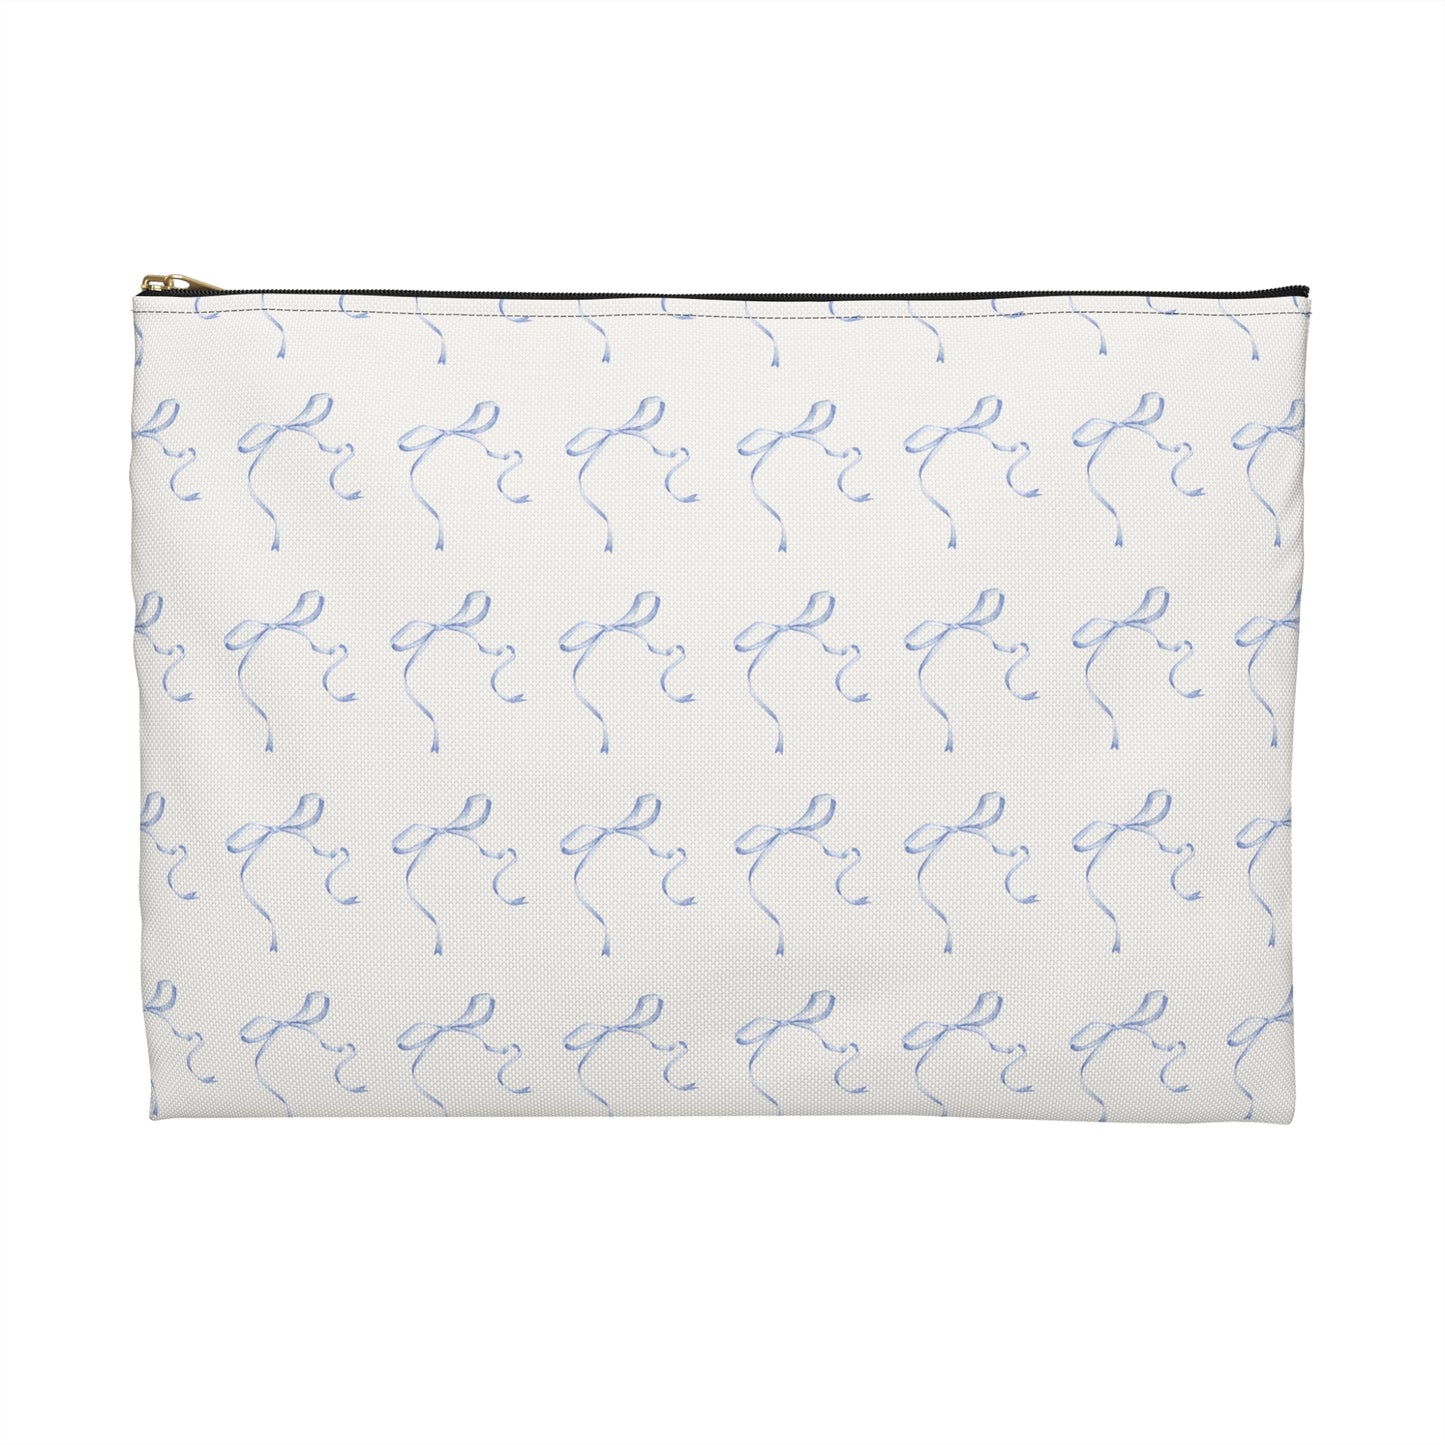 Multiple Thin Blue Bows on Beige Accessory Pouch